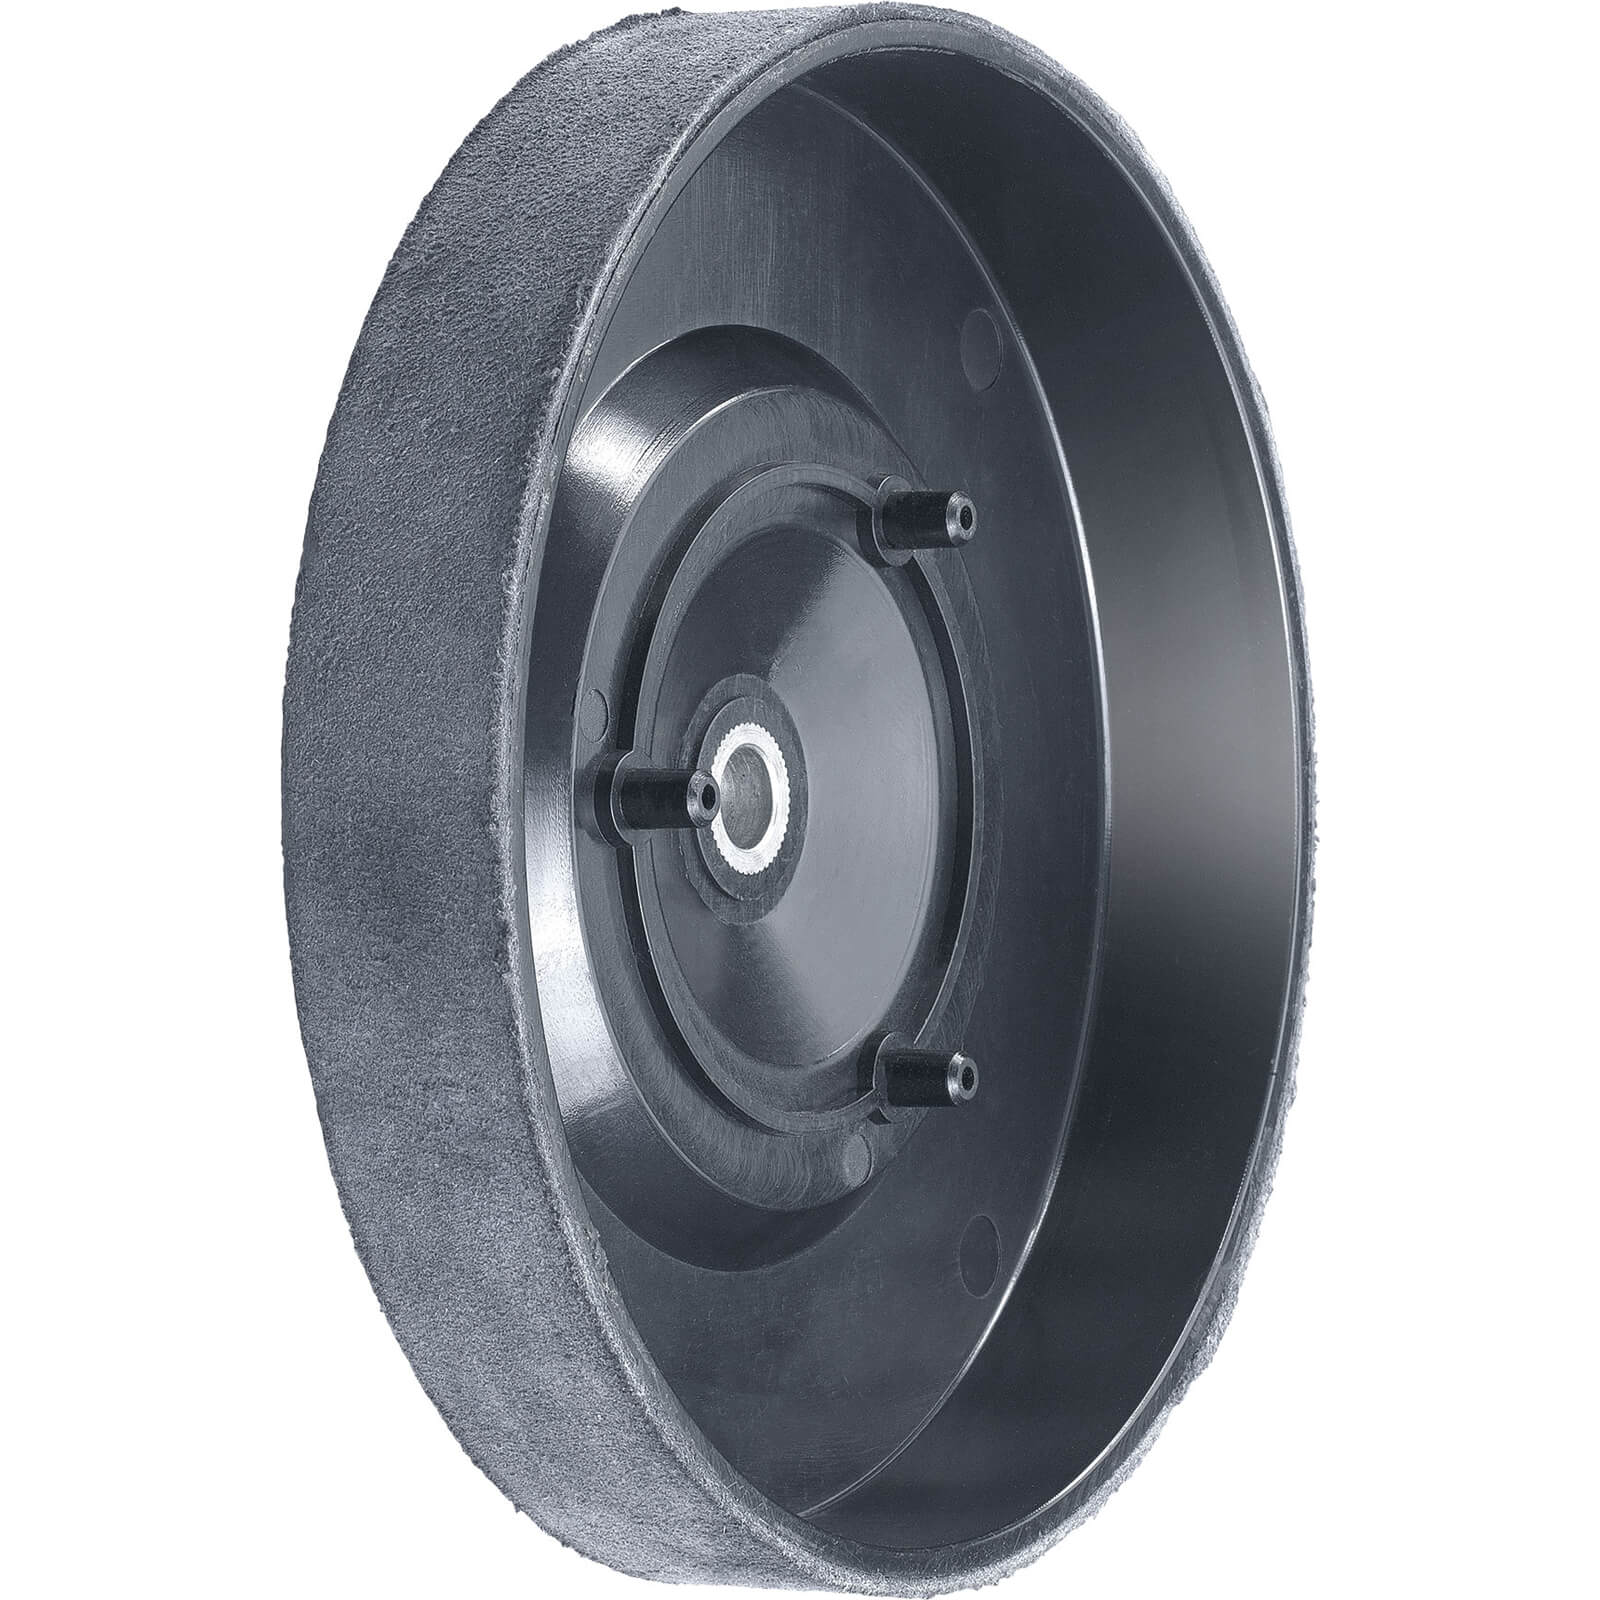 Image of Einhell Leather Honing Wheel for Grinders 182mm 12.7mm